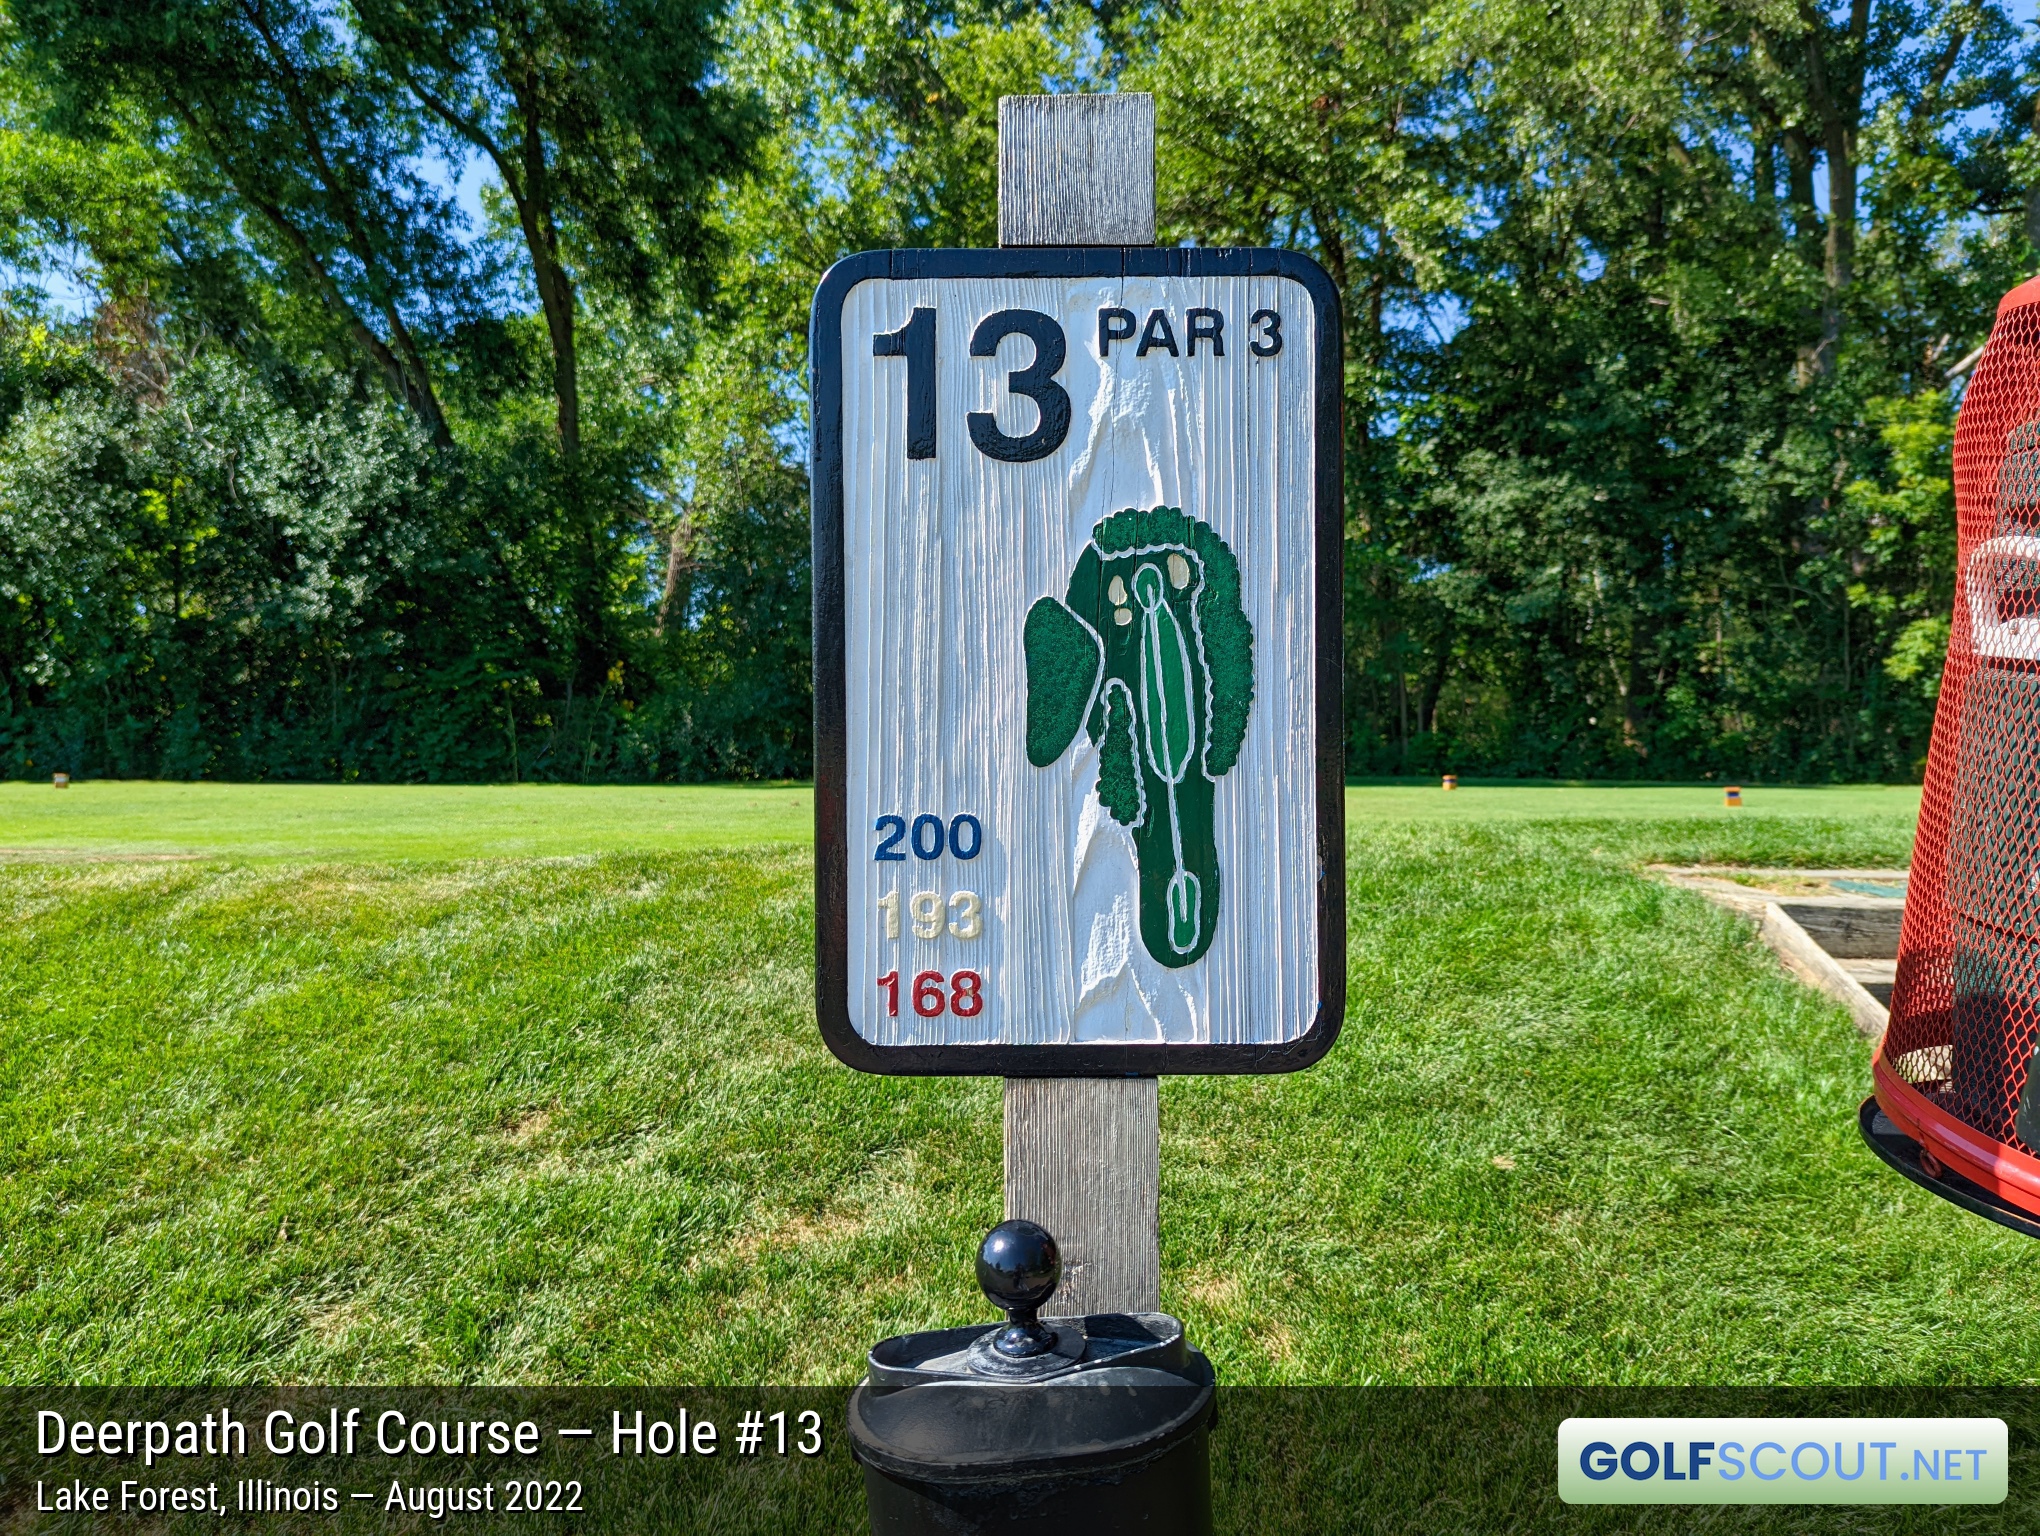 Photo of hole #13 at Deerpath Golf Course in Lake Forest, Illinois. 